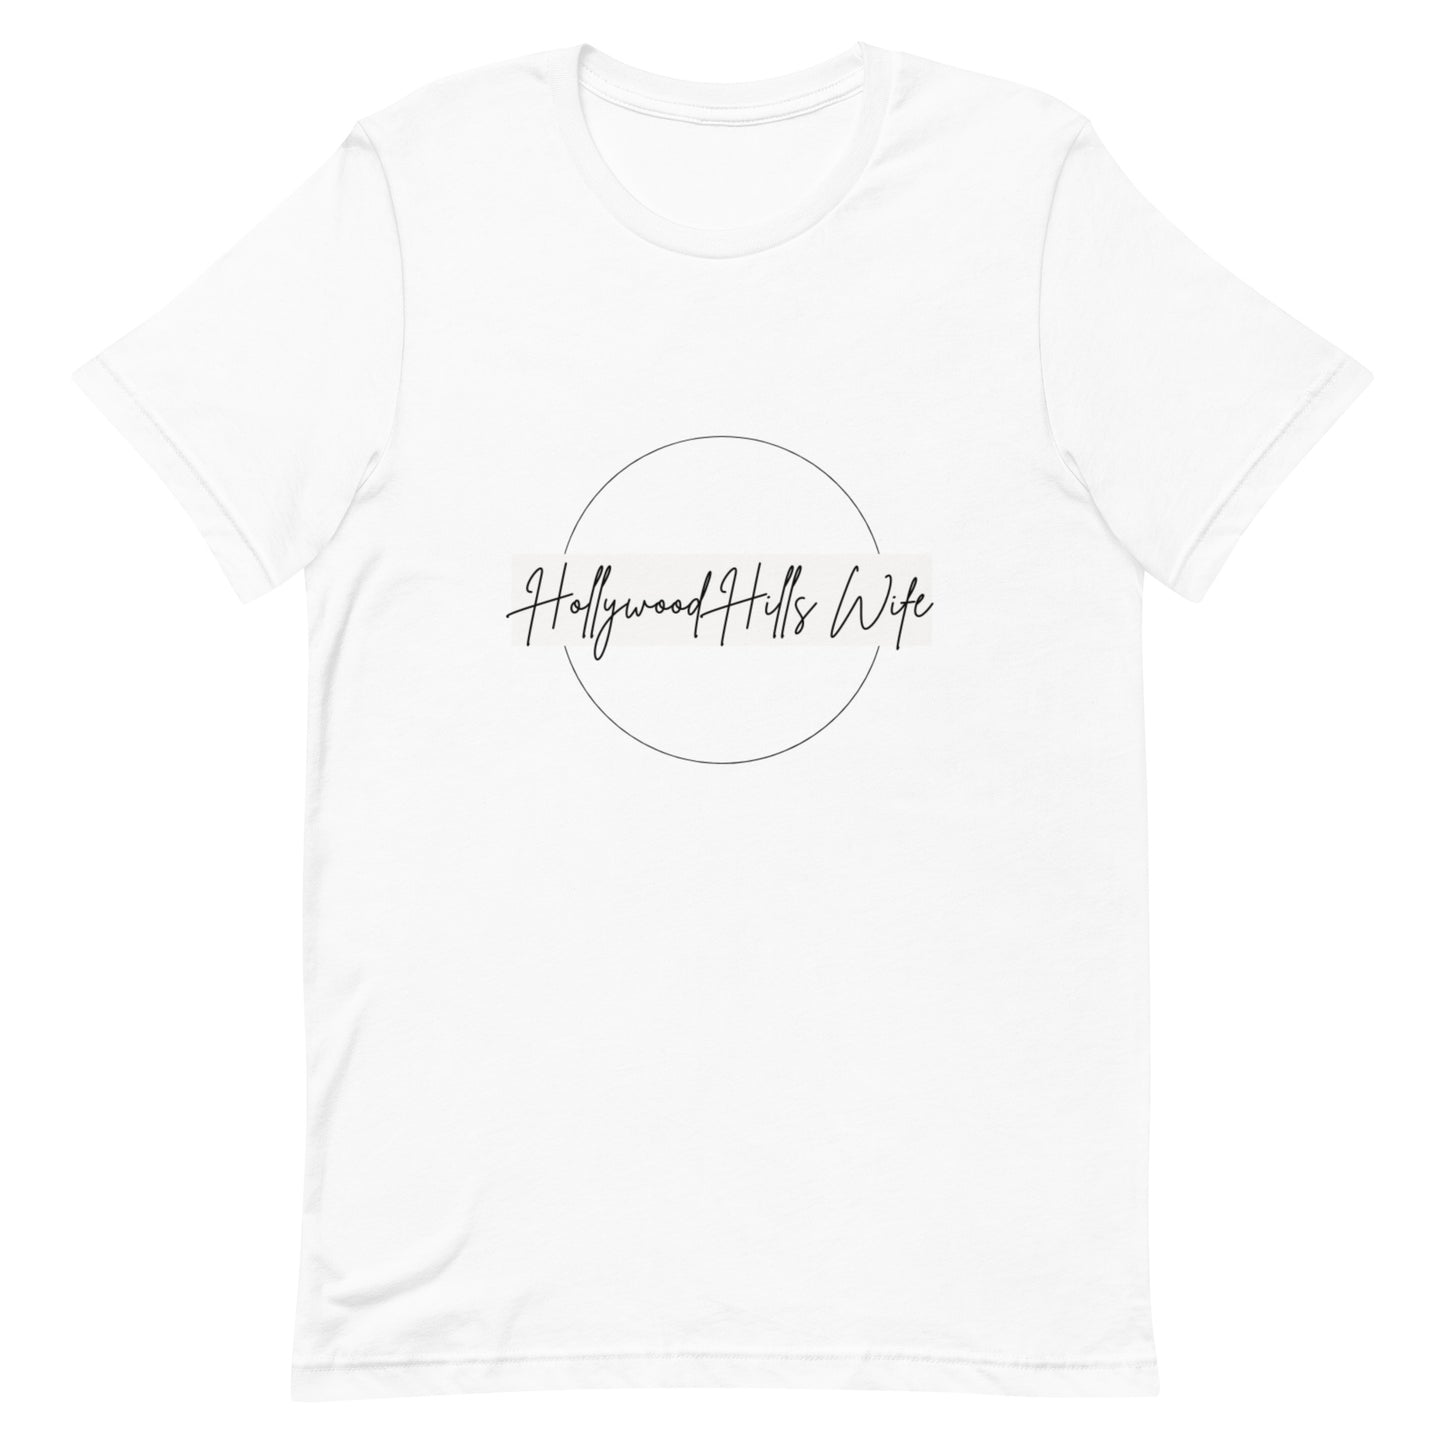 Hollywood Hills Wife t-shirt